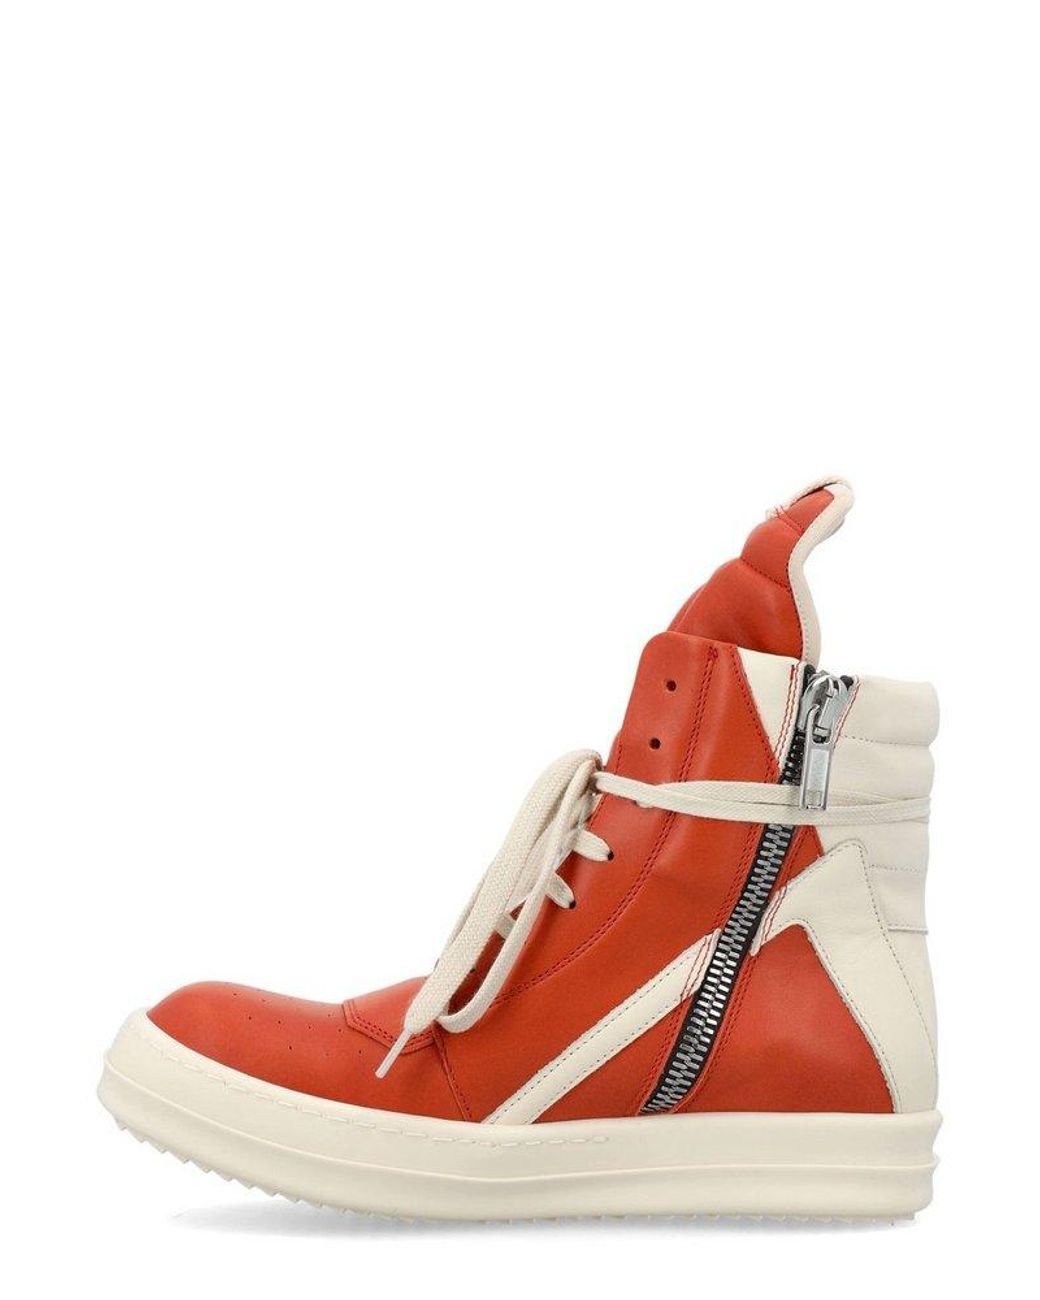 Rick Owens Lace Sneakers in Orange for Men Mens Shoes Trainers High-top trainers 